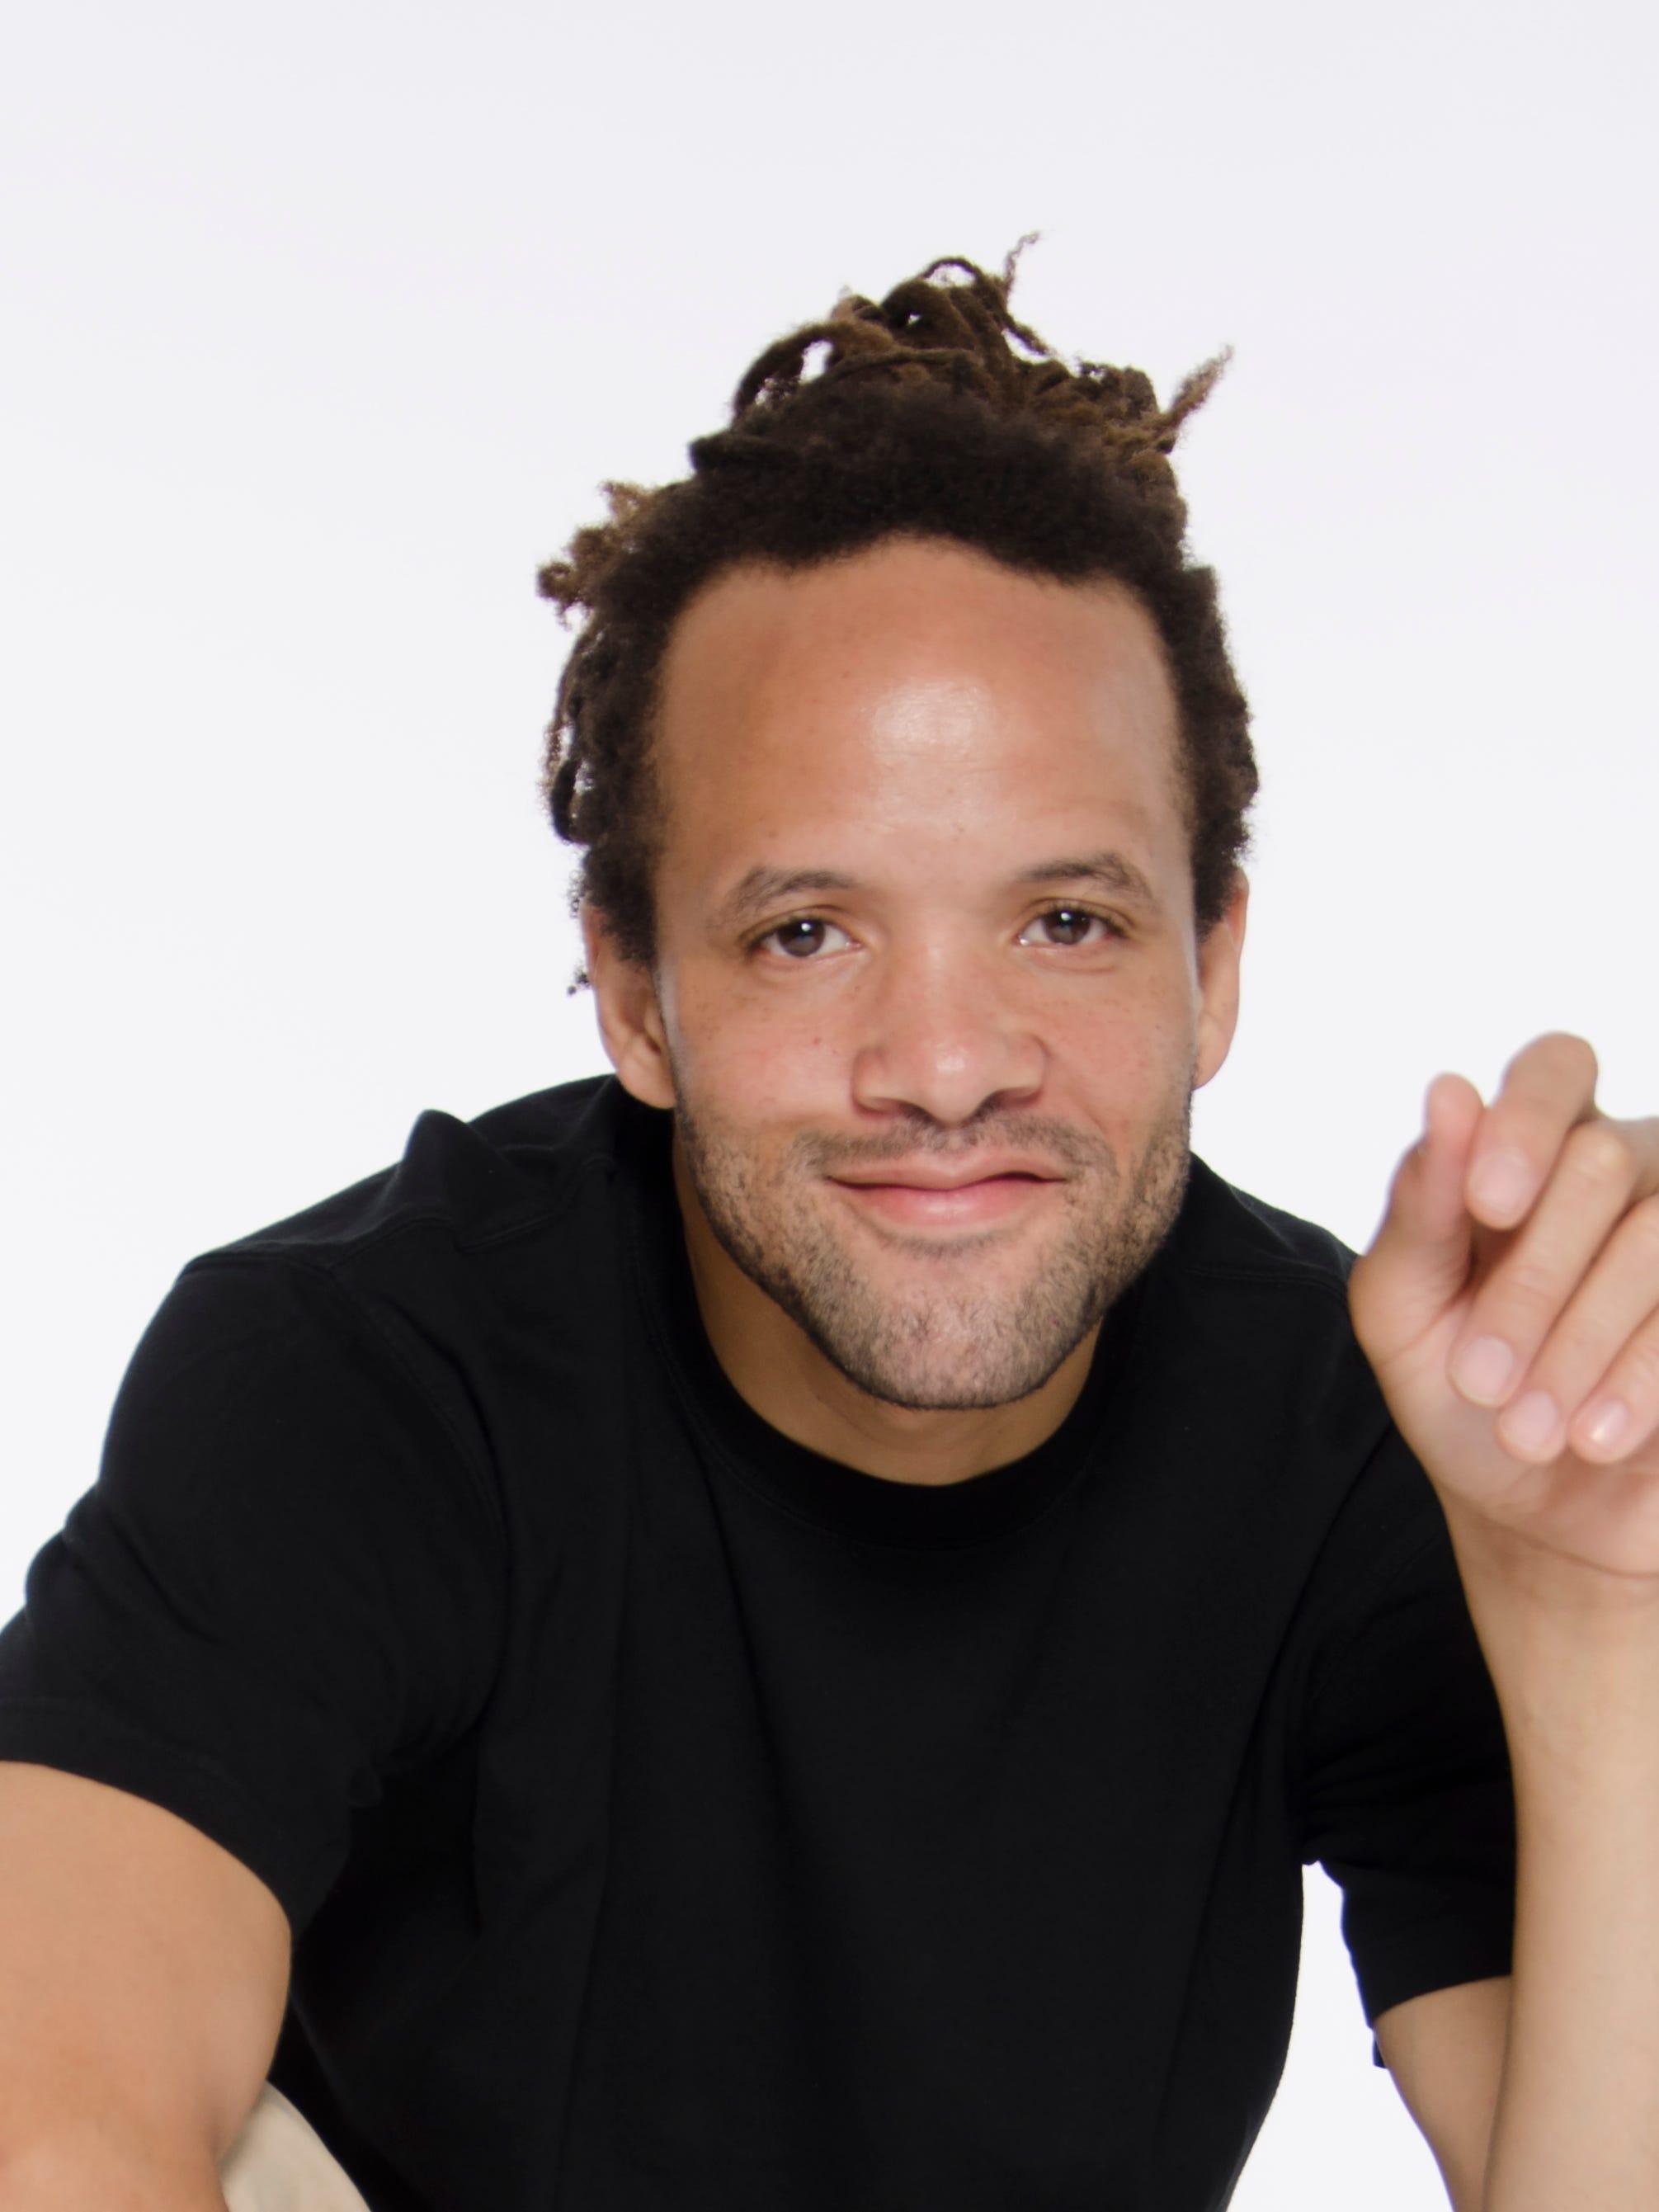 Is Savion Glover greatest tap dancer of our time? You decide